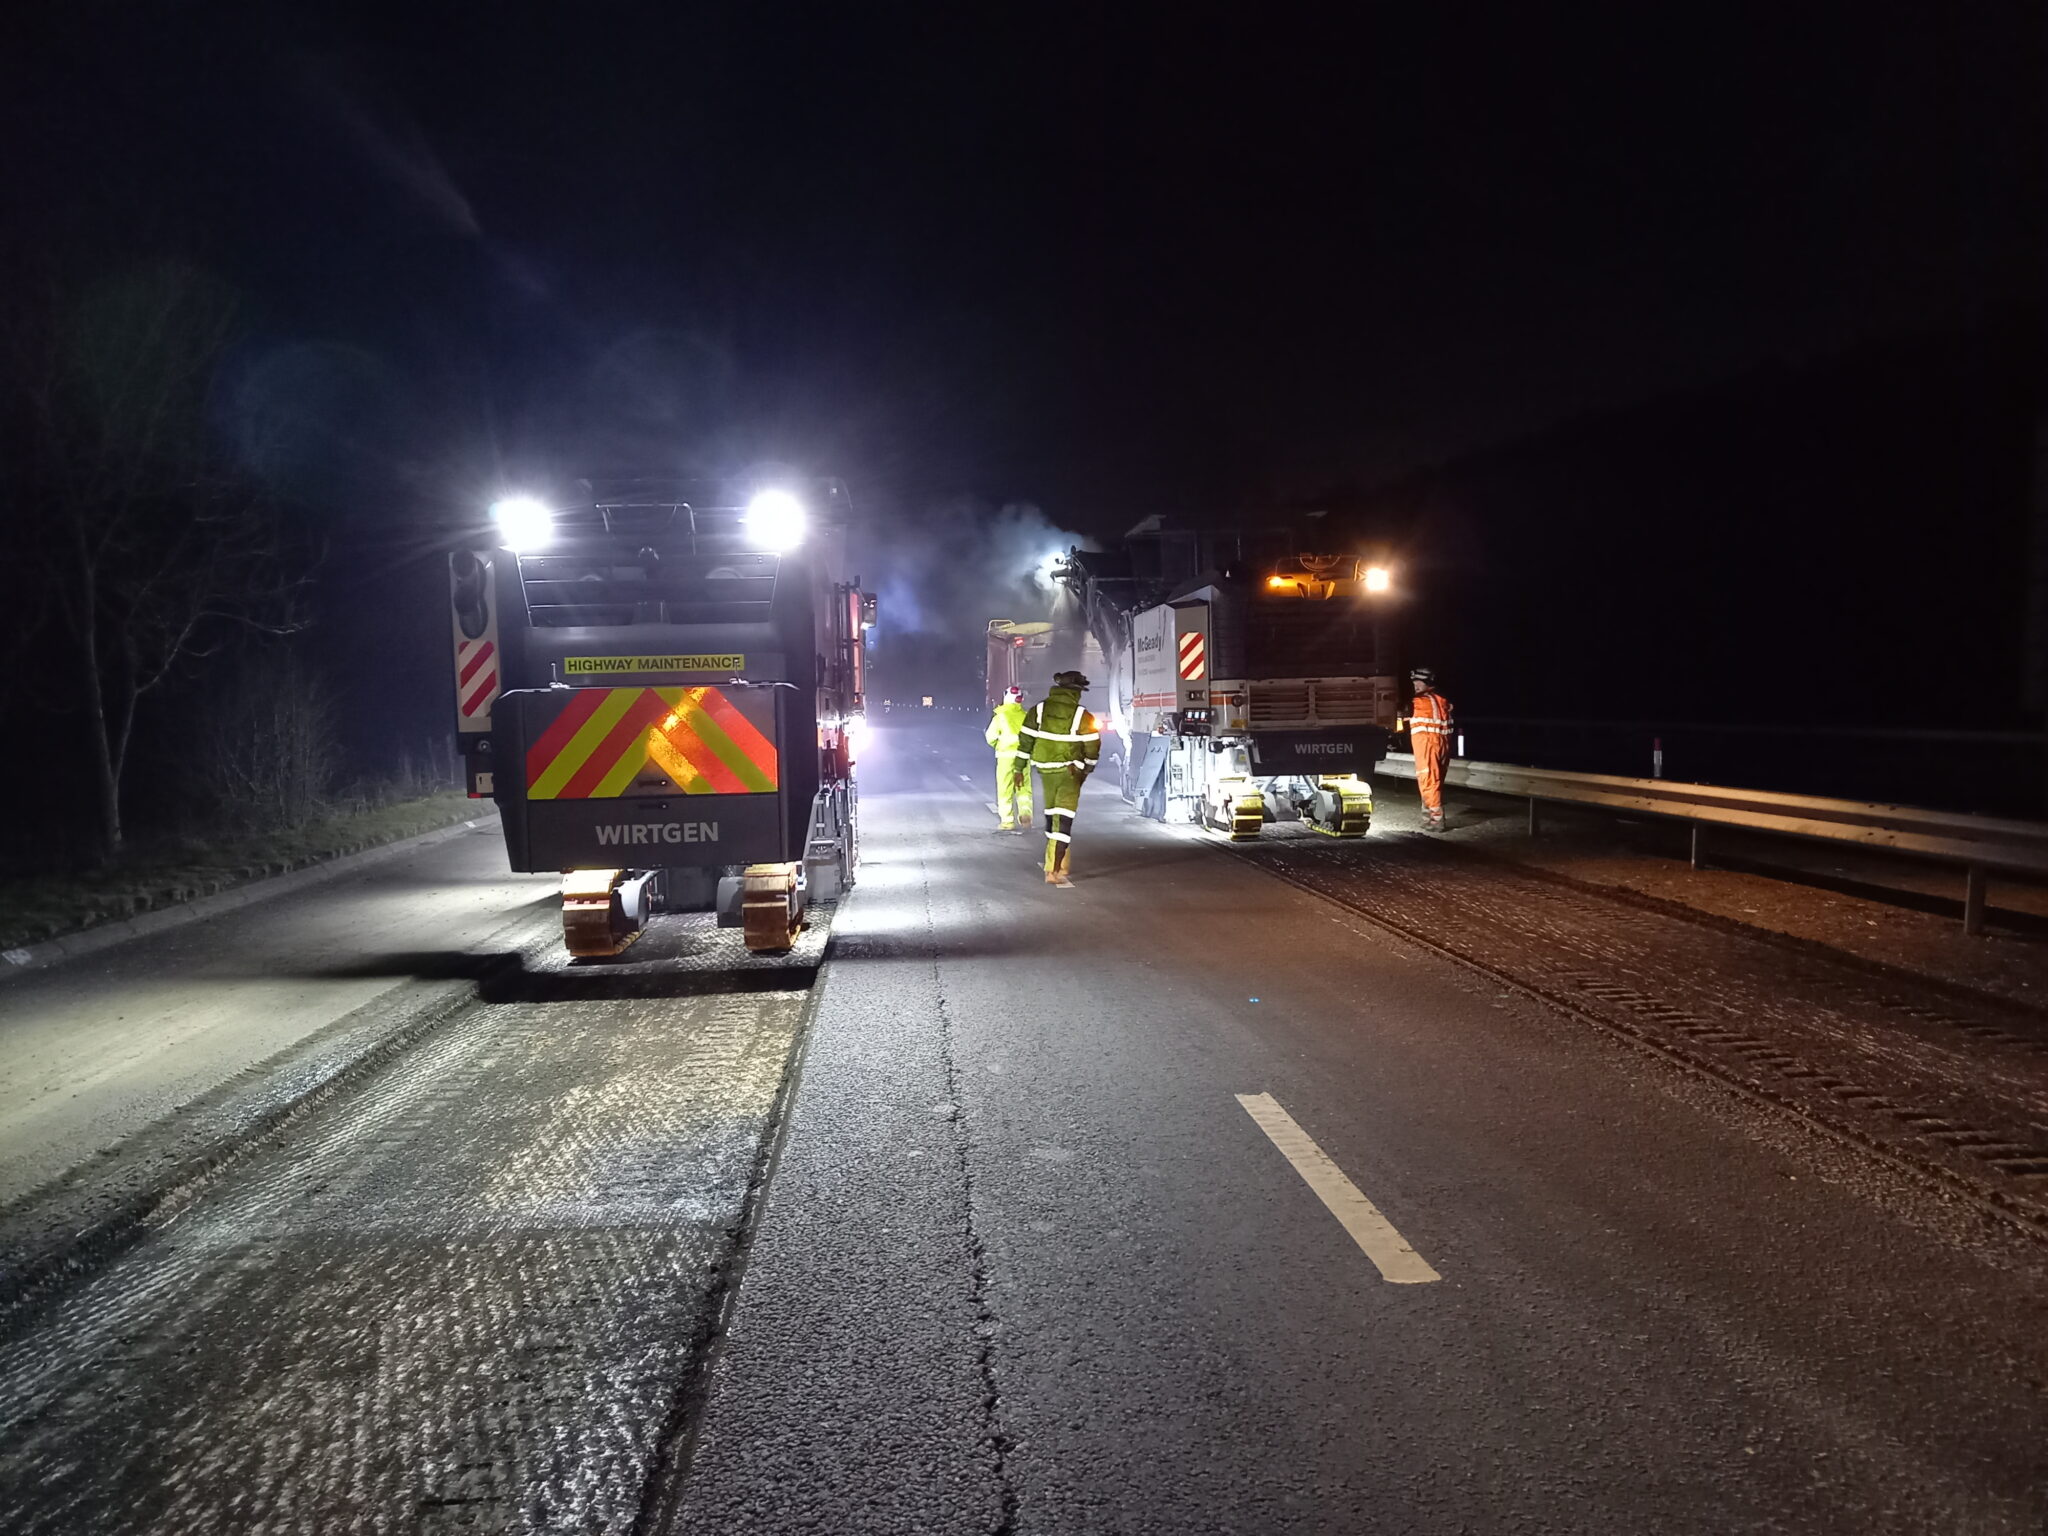 OVERNIGHT CLOSURES OF THE SOUTHBOUND M80 AND M876